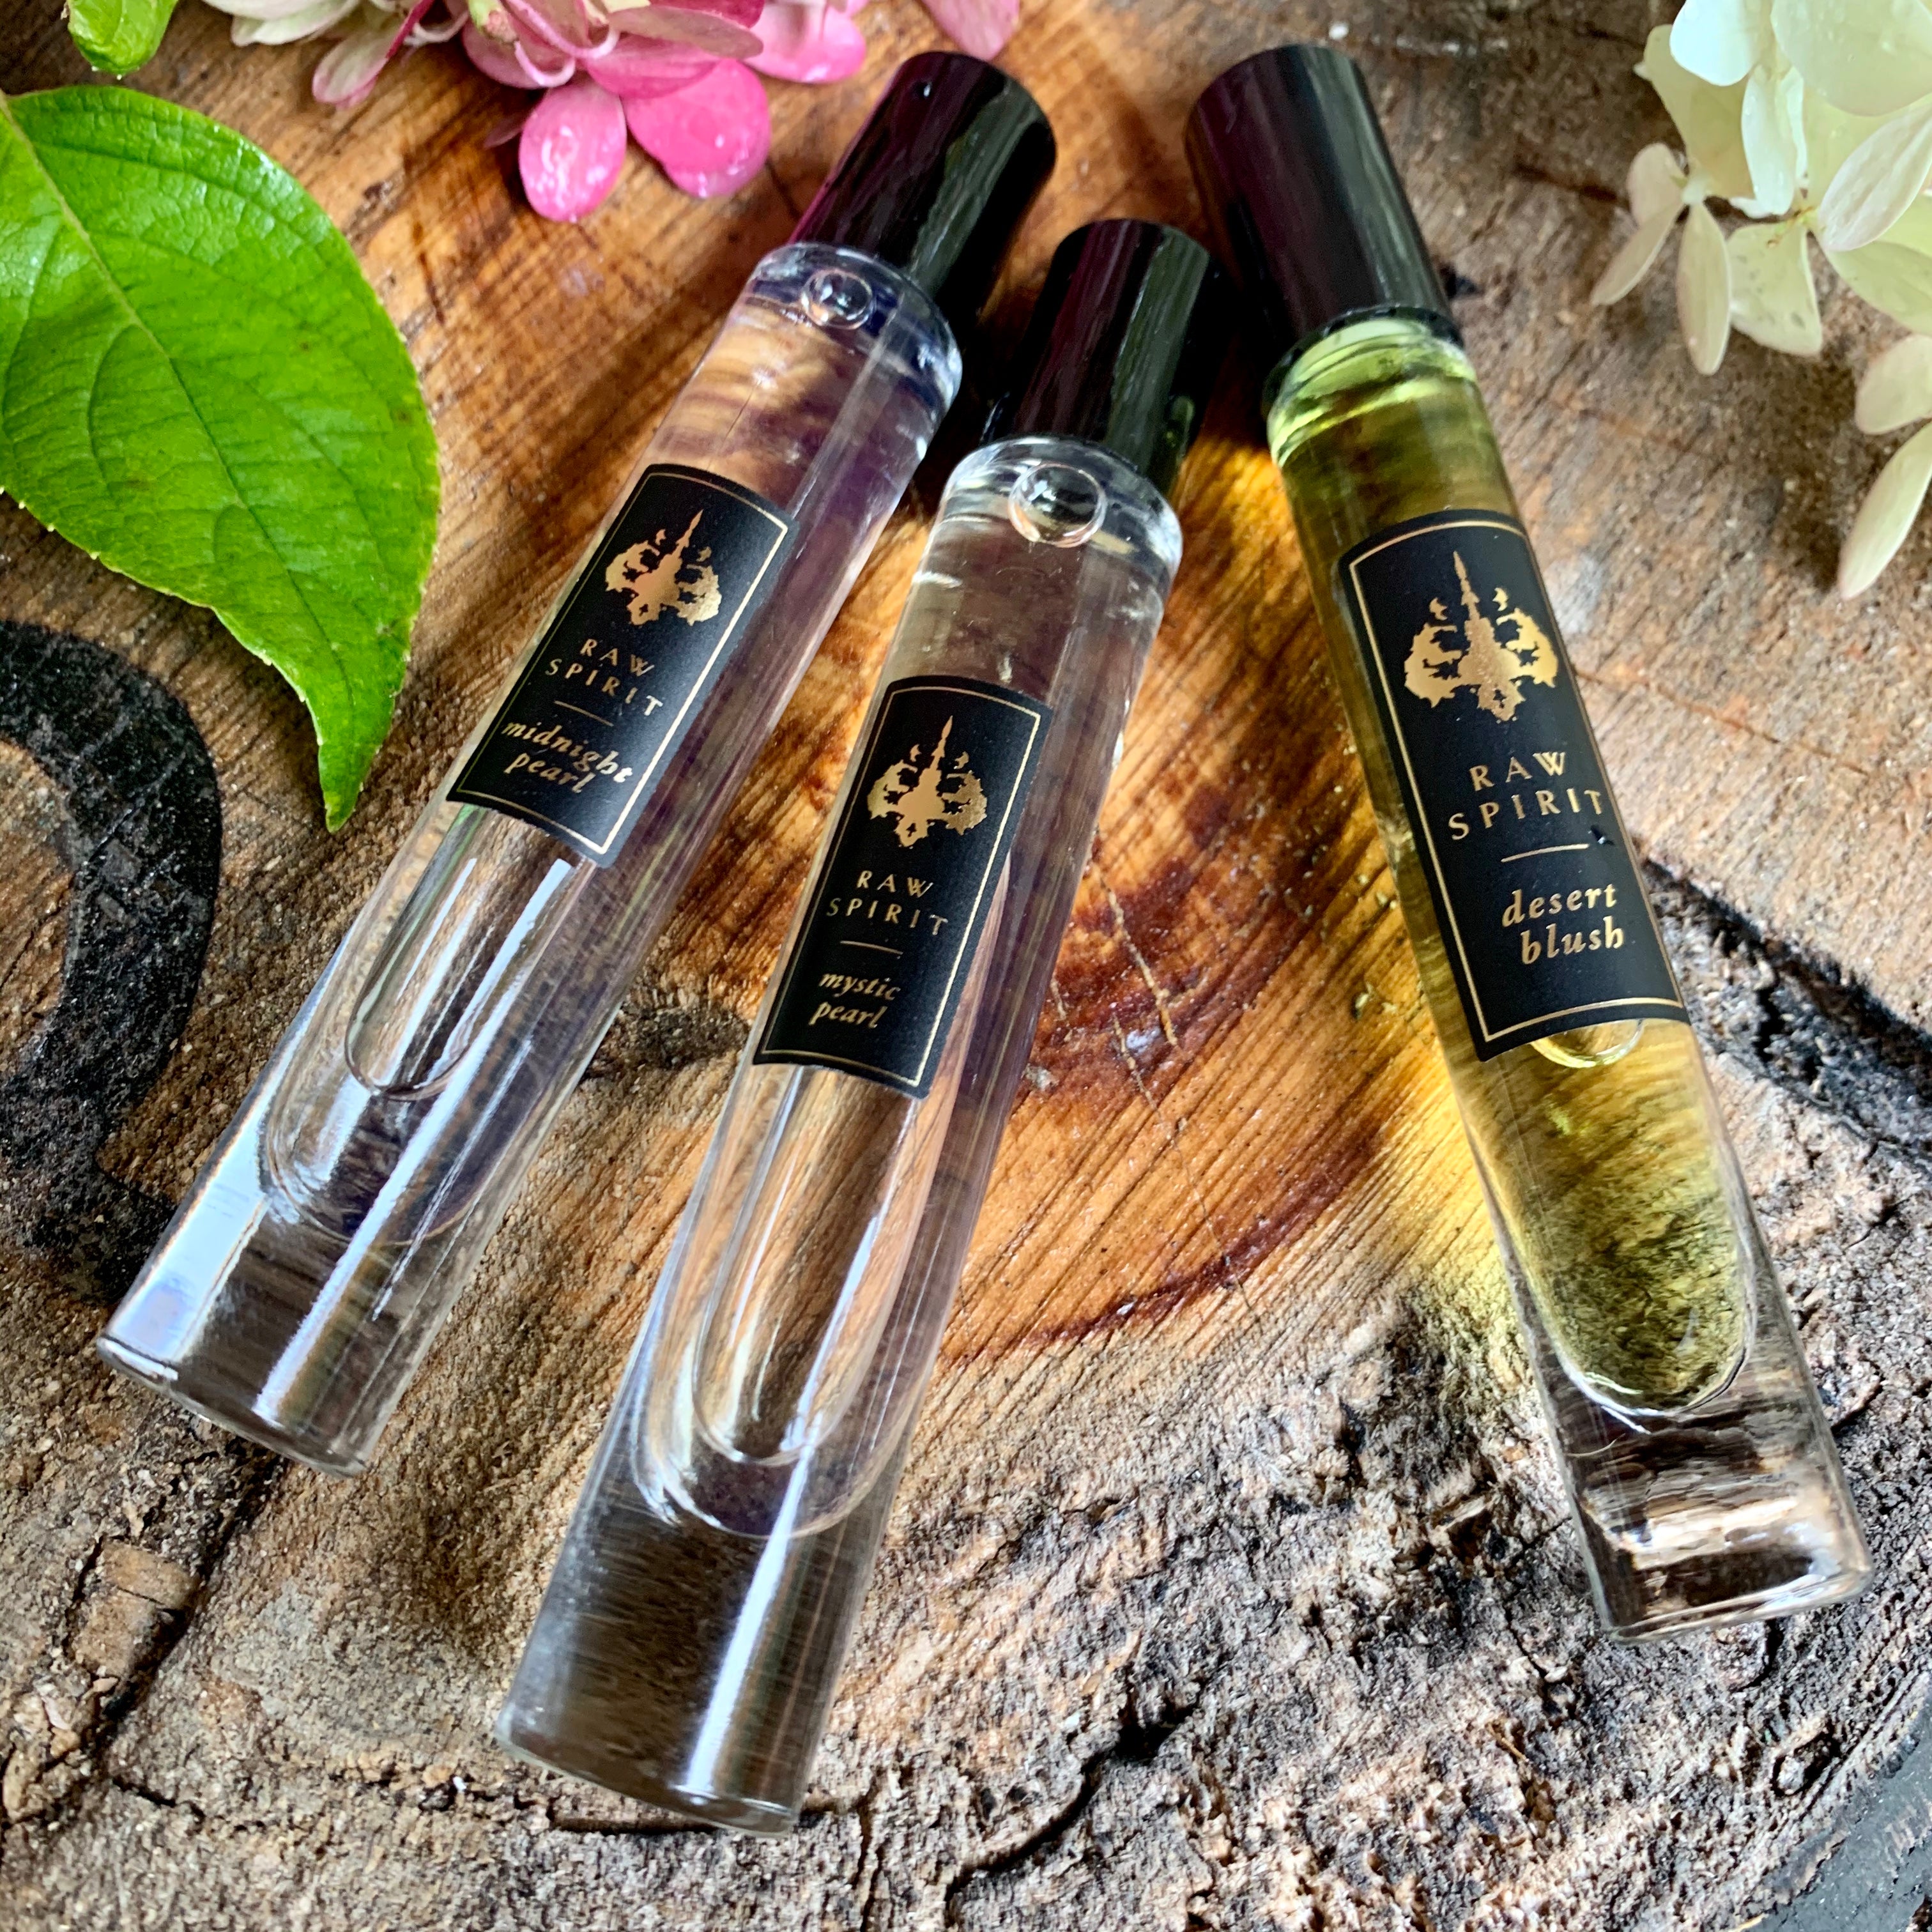 Online Exclusive! Our Floral Perfume Rollerball Trio includes three of our bestselling floral, feminine perfumes – Desert Blush, Midnight Pearl, and Mystic Pearl - in a limited-edition collection at a special price. This set makes a wonderful gift for someone who prefers floral perfumes.